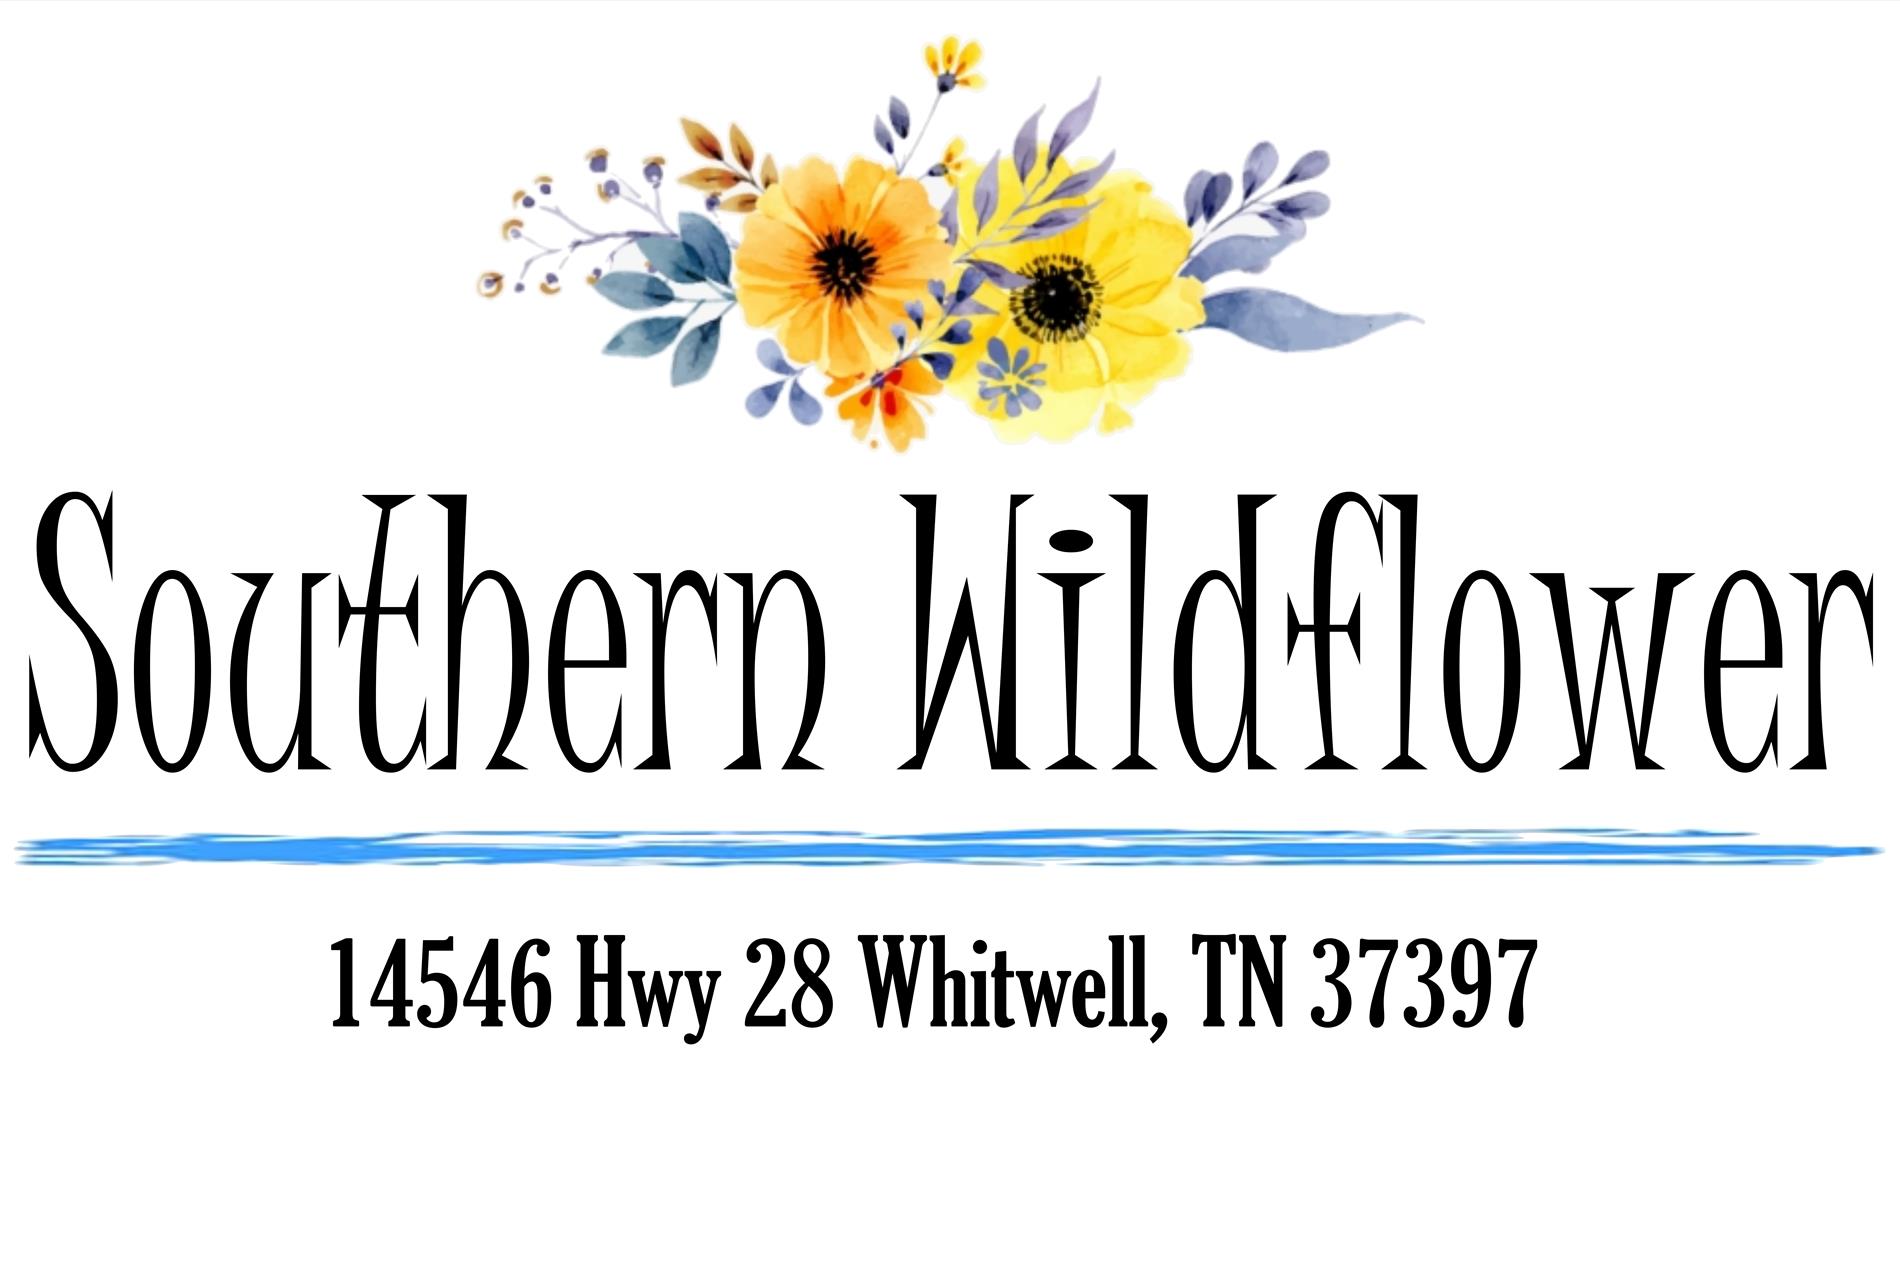 Southern Wildflower